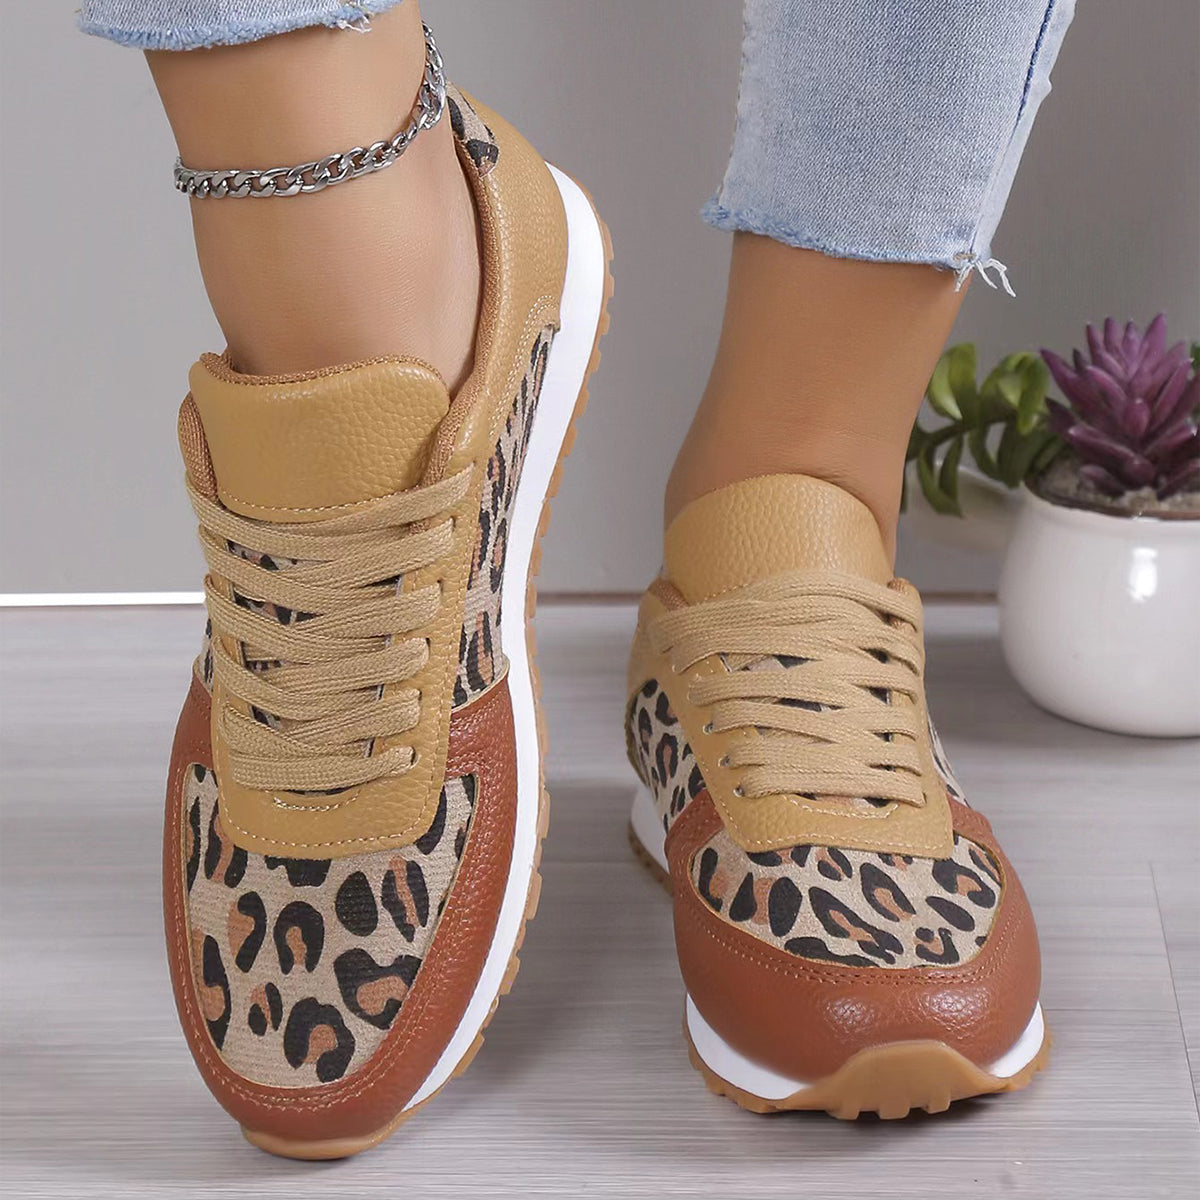 Fashoin Leopard Print Lace-up Sports Shoes For Women Sneakers Casual Running Walking Flat Shoes